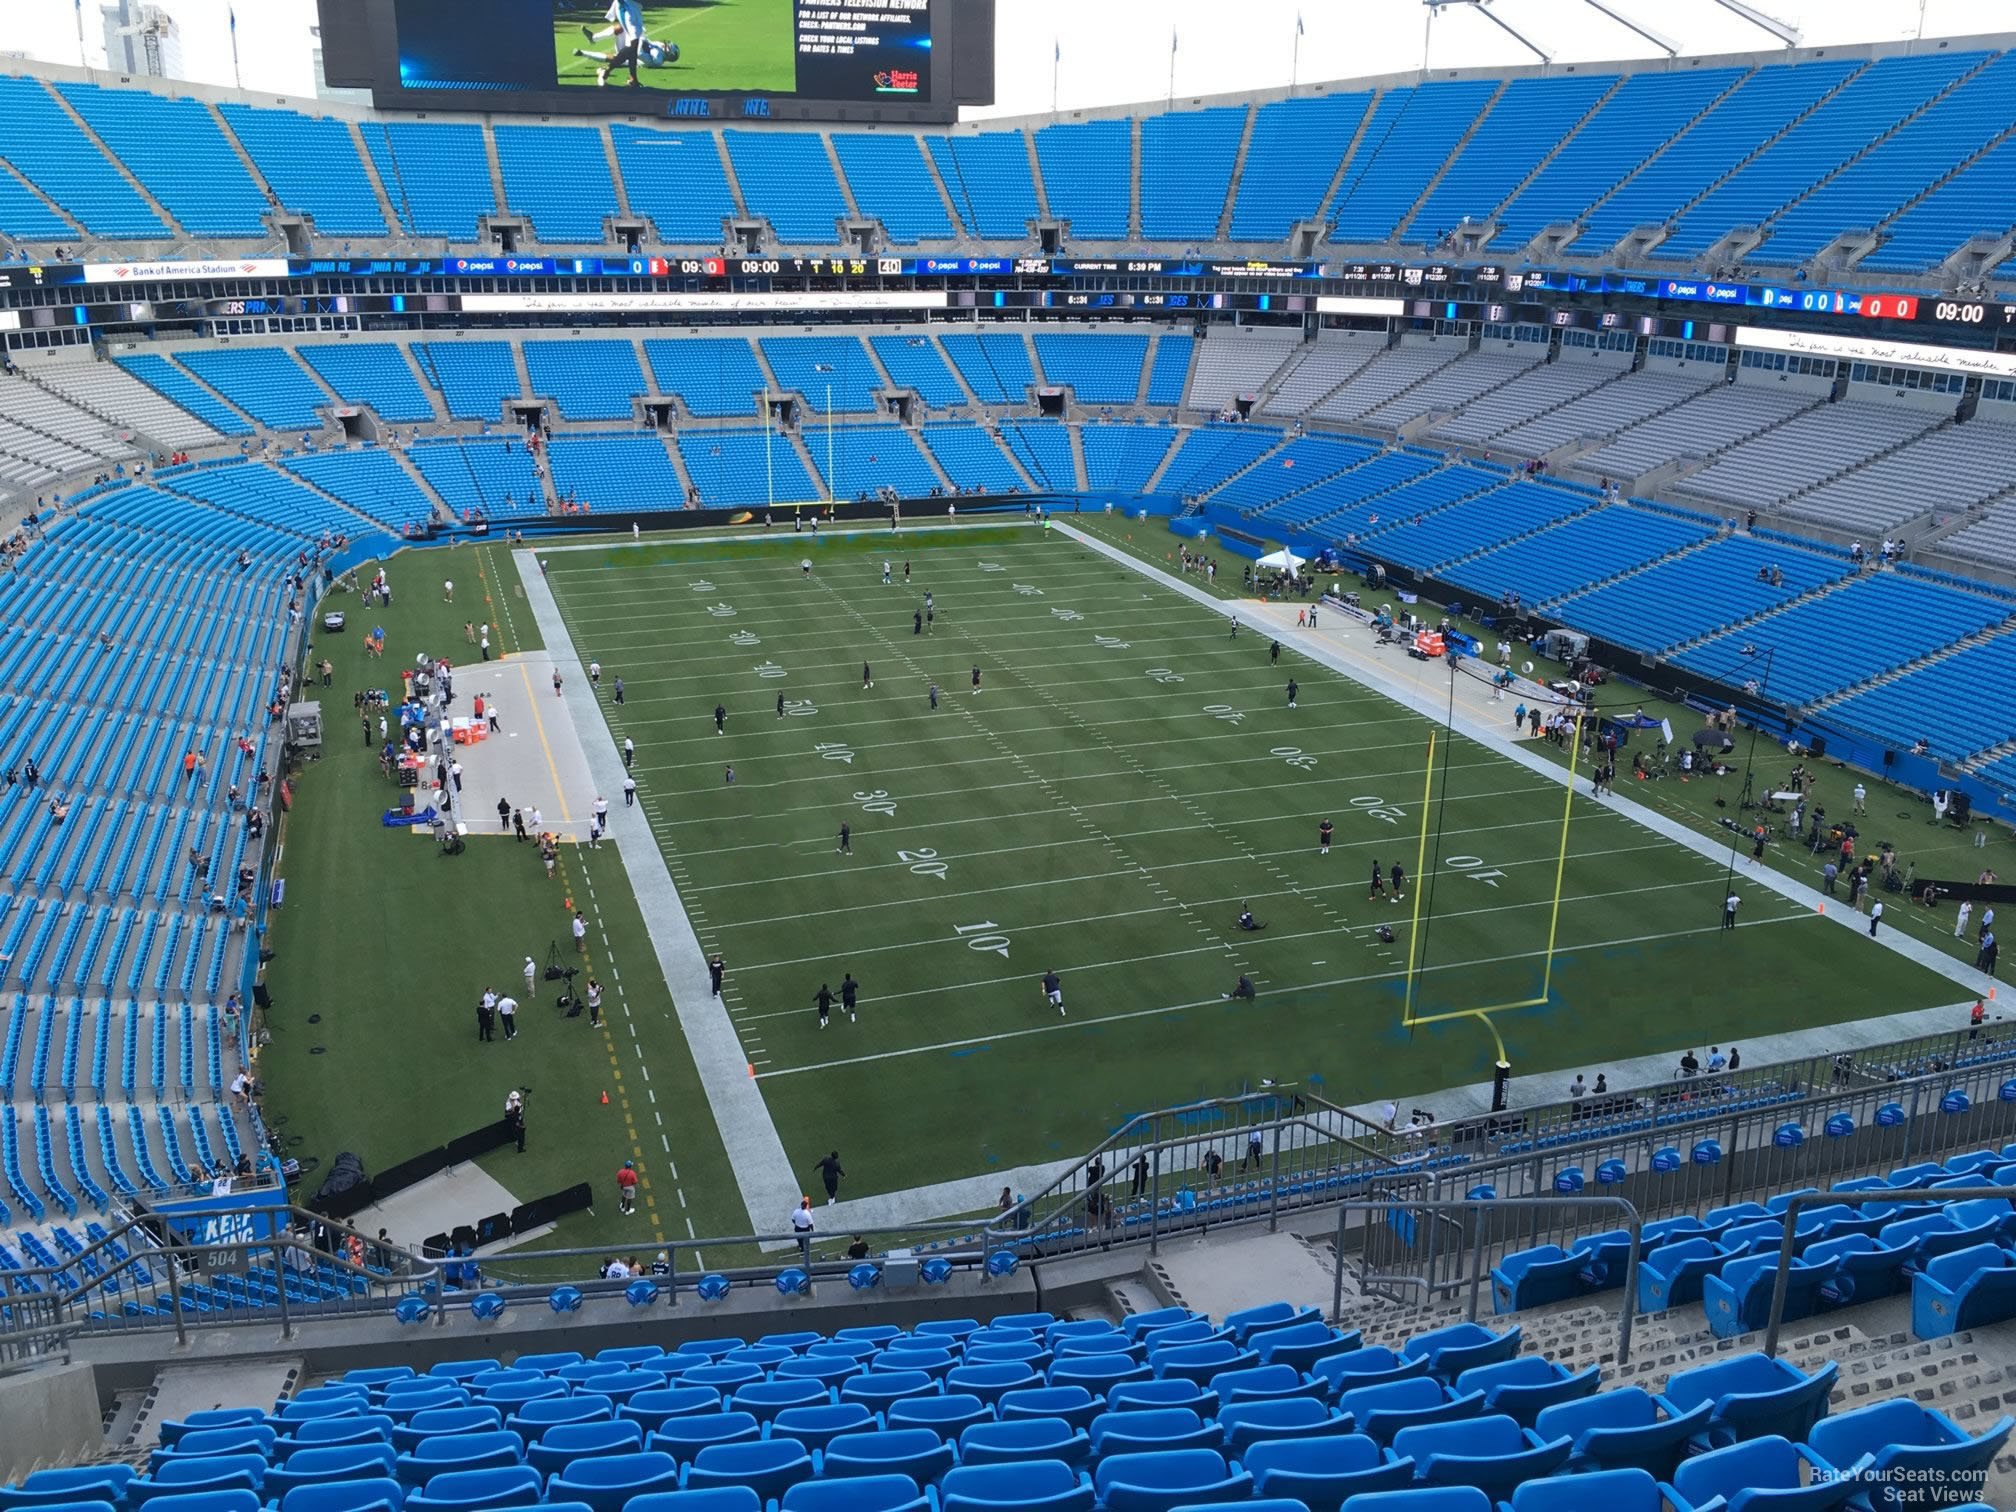 section 504, row 9 seat view  for football - bank of america stadium